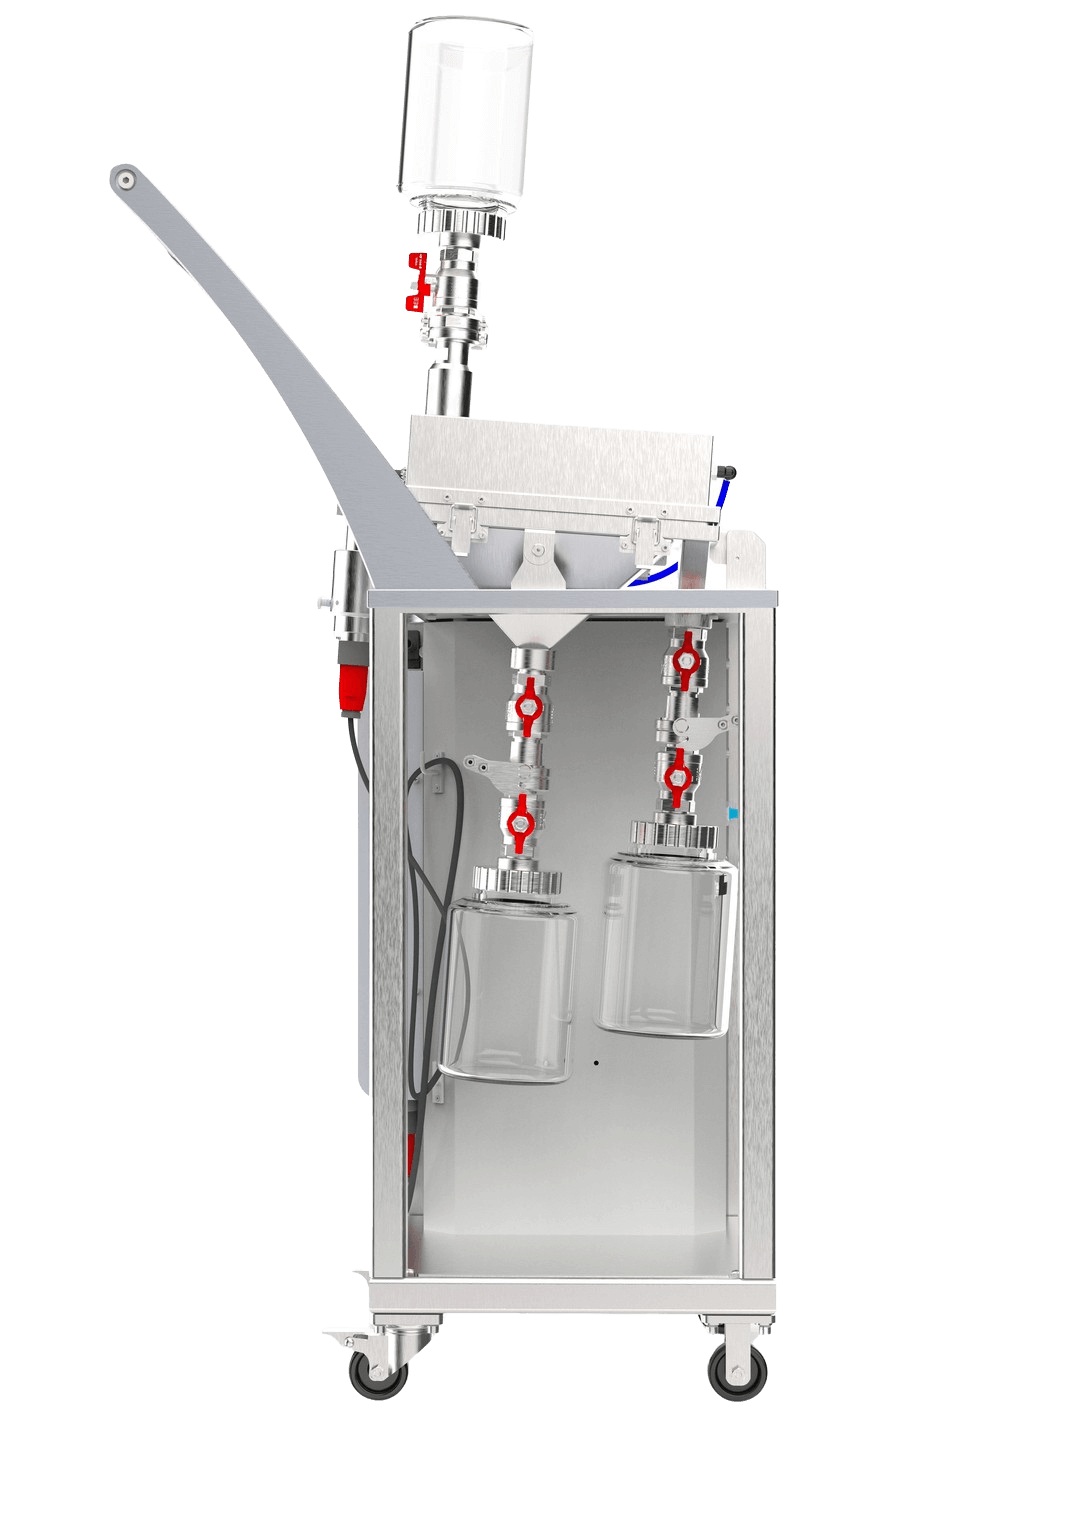 Image showing 2SIEVE system from 2OneLab for powder recycling and reusage